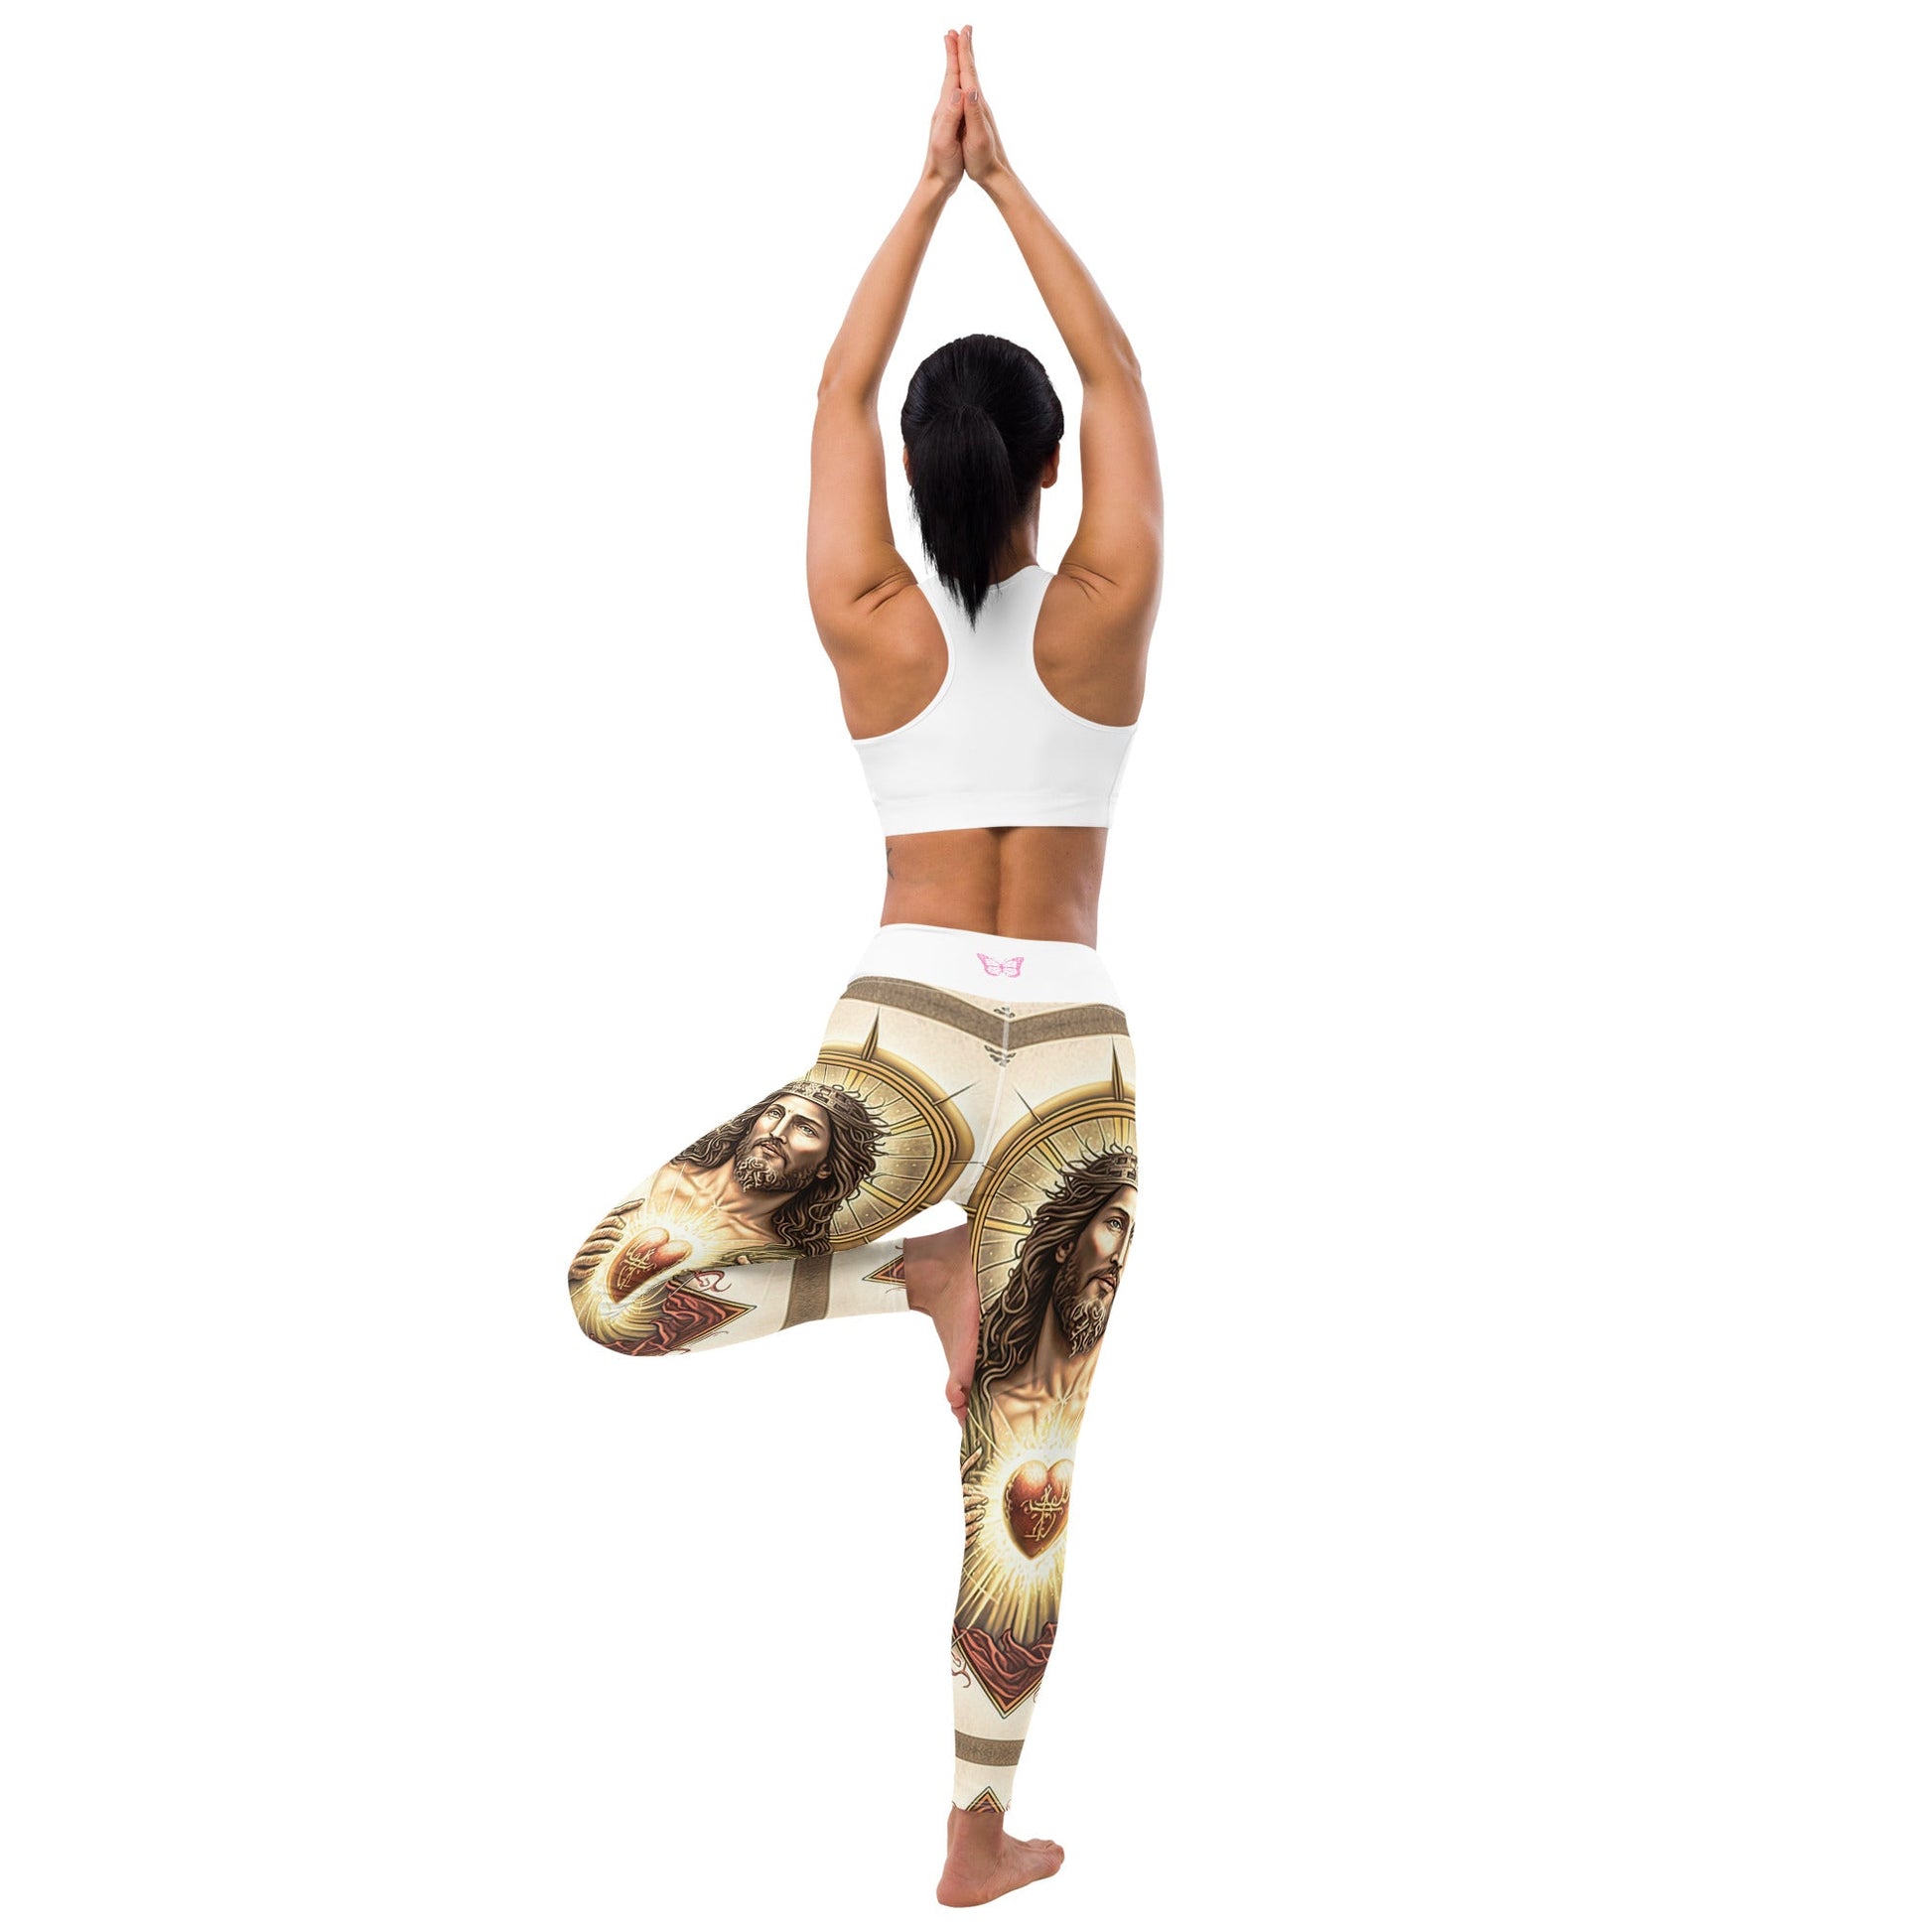 Butterfly Legging, Christian Activewear